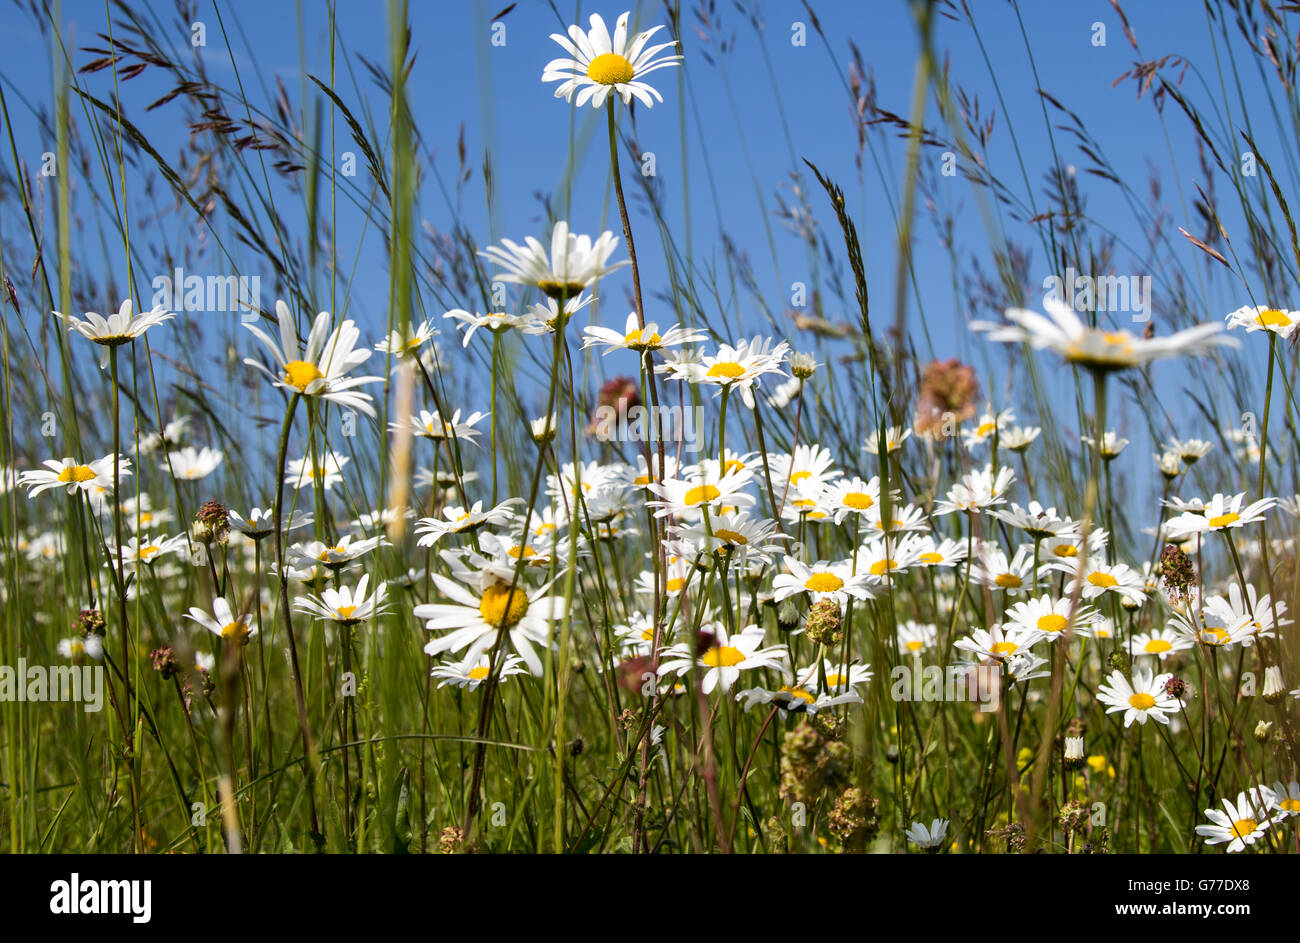 Wild michaelmas daisies in meadow with long grass Stock Photo